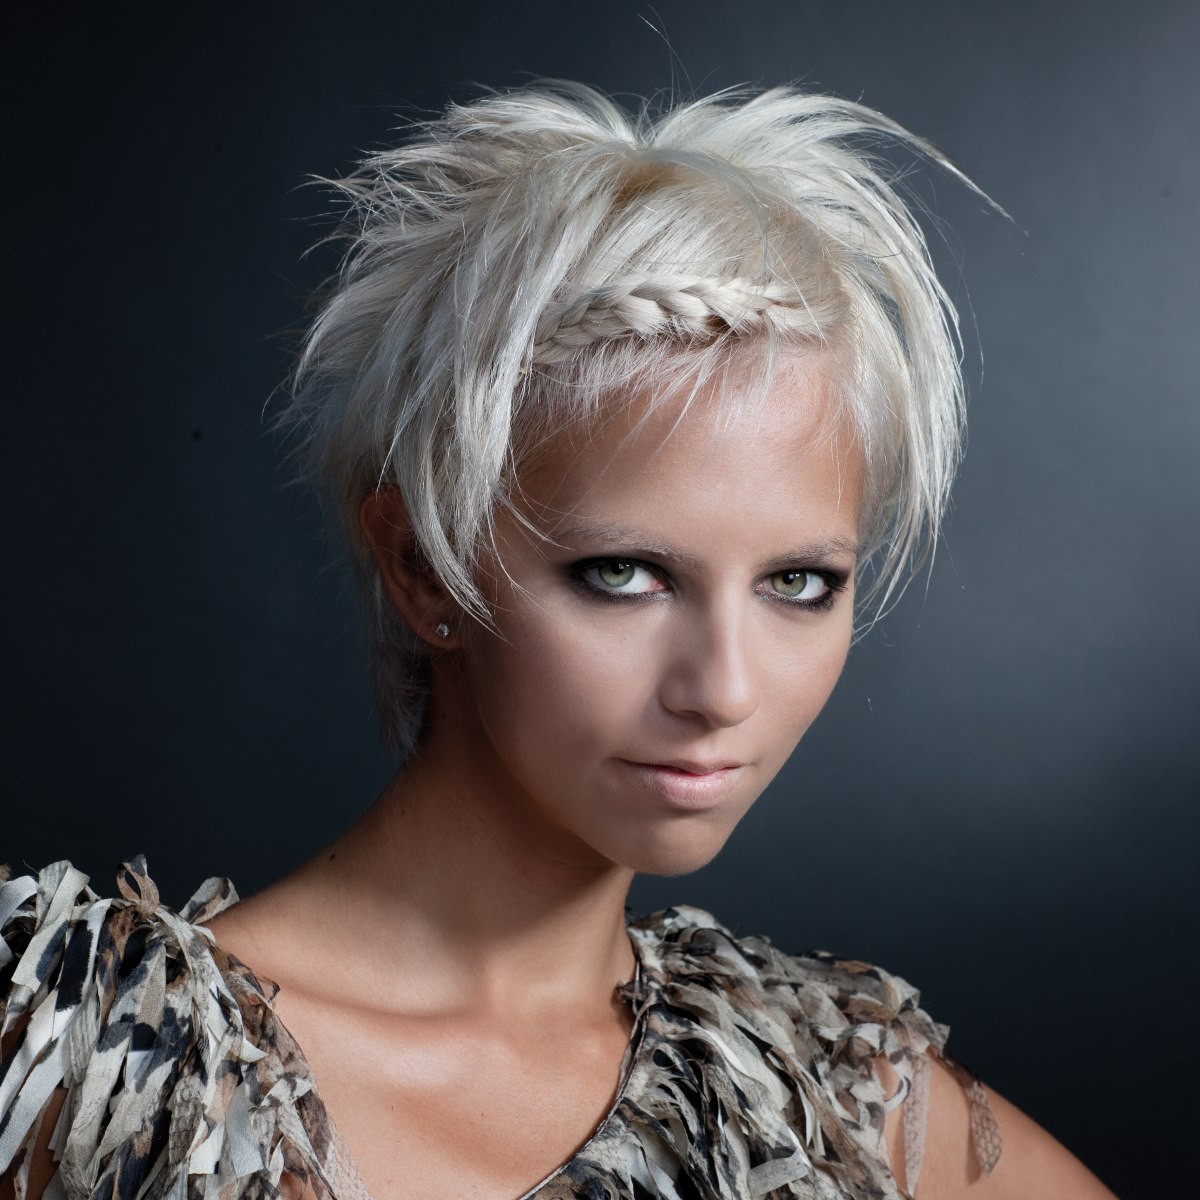 Punky Long Hairstyles
 Punky hairstyle with spiked ends and a braided hairband